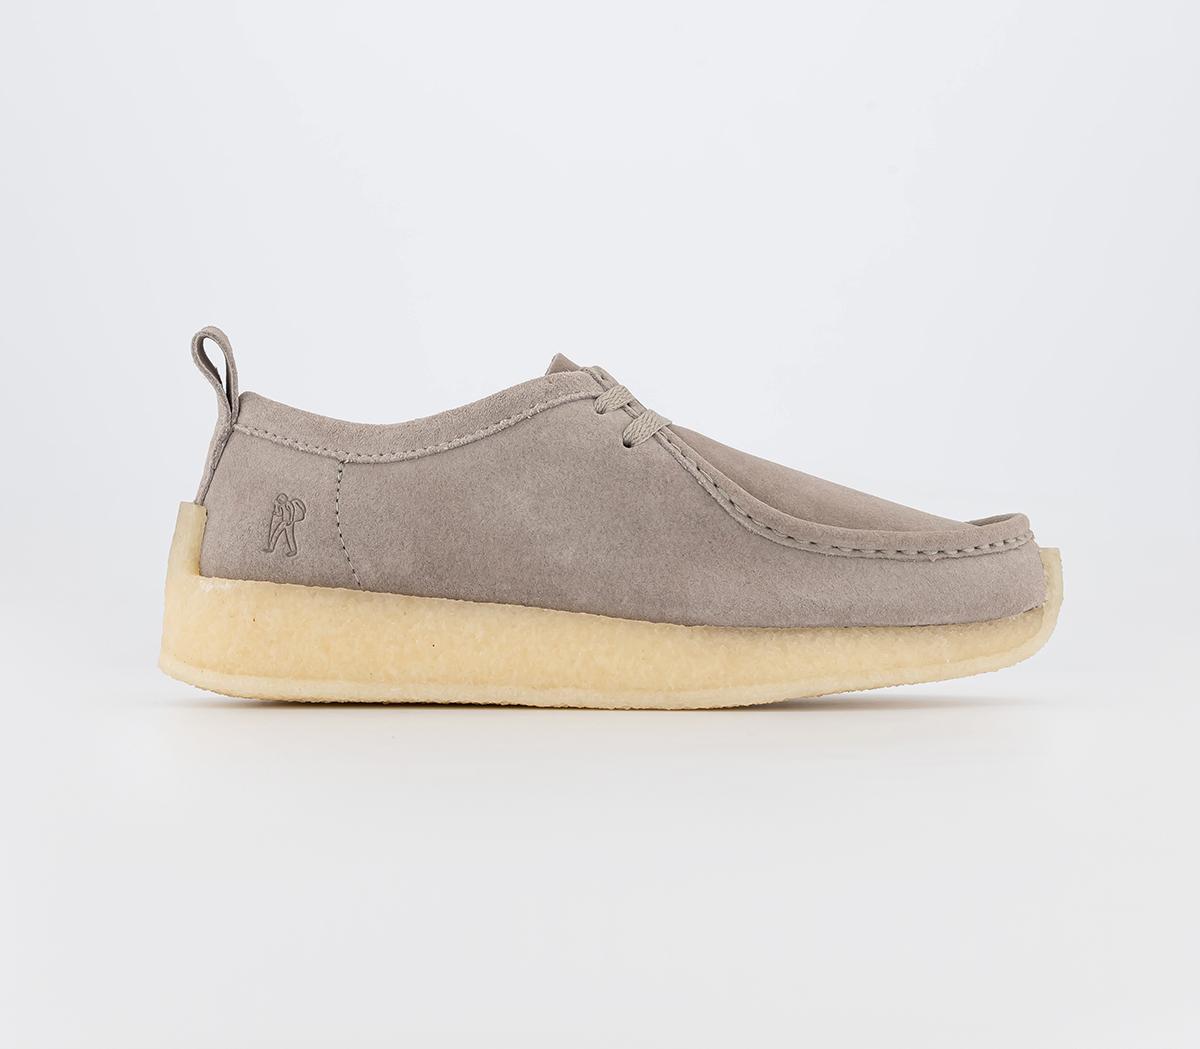 Clarks Originals8th Street Rossendale Shoes Stone